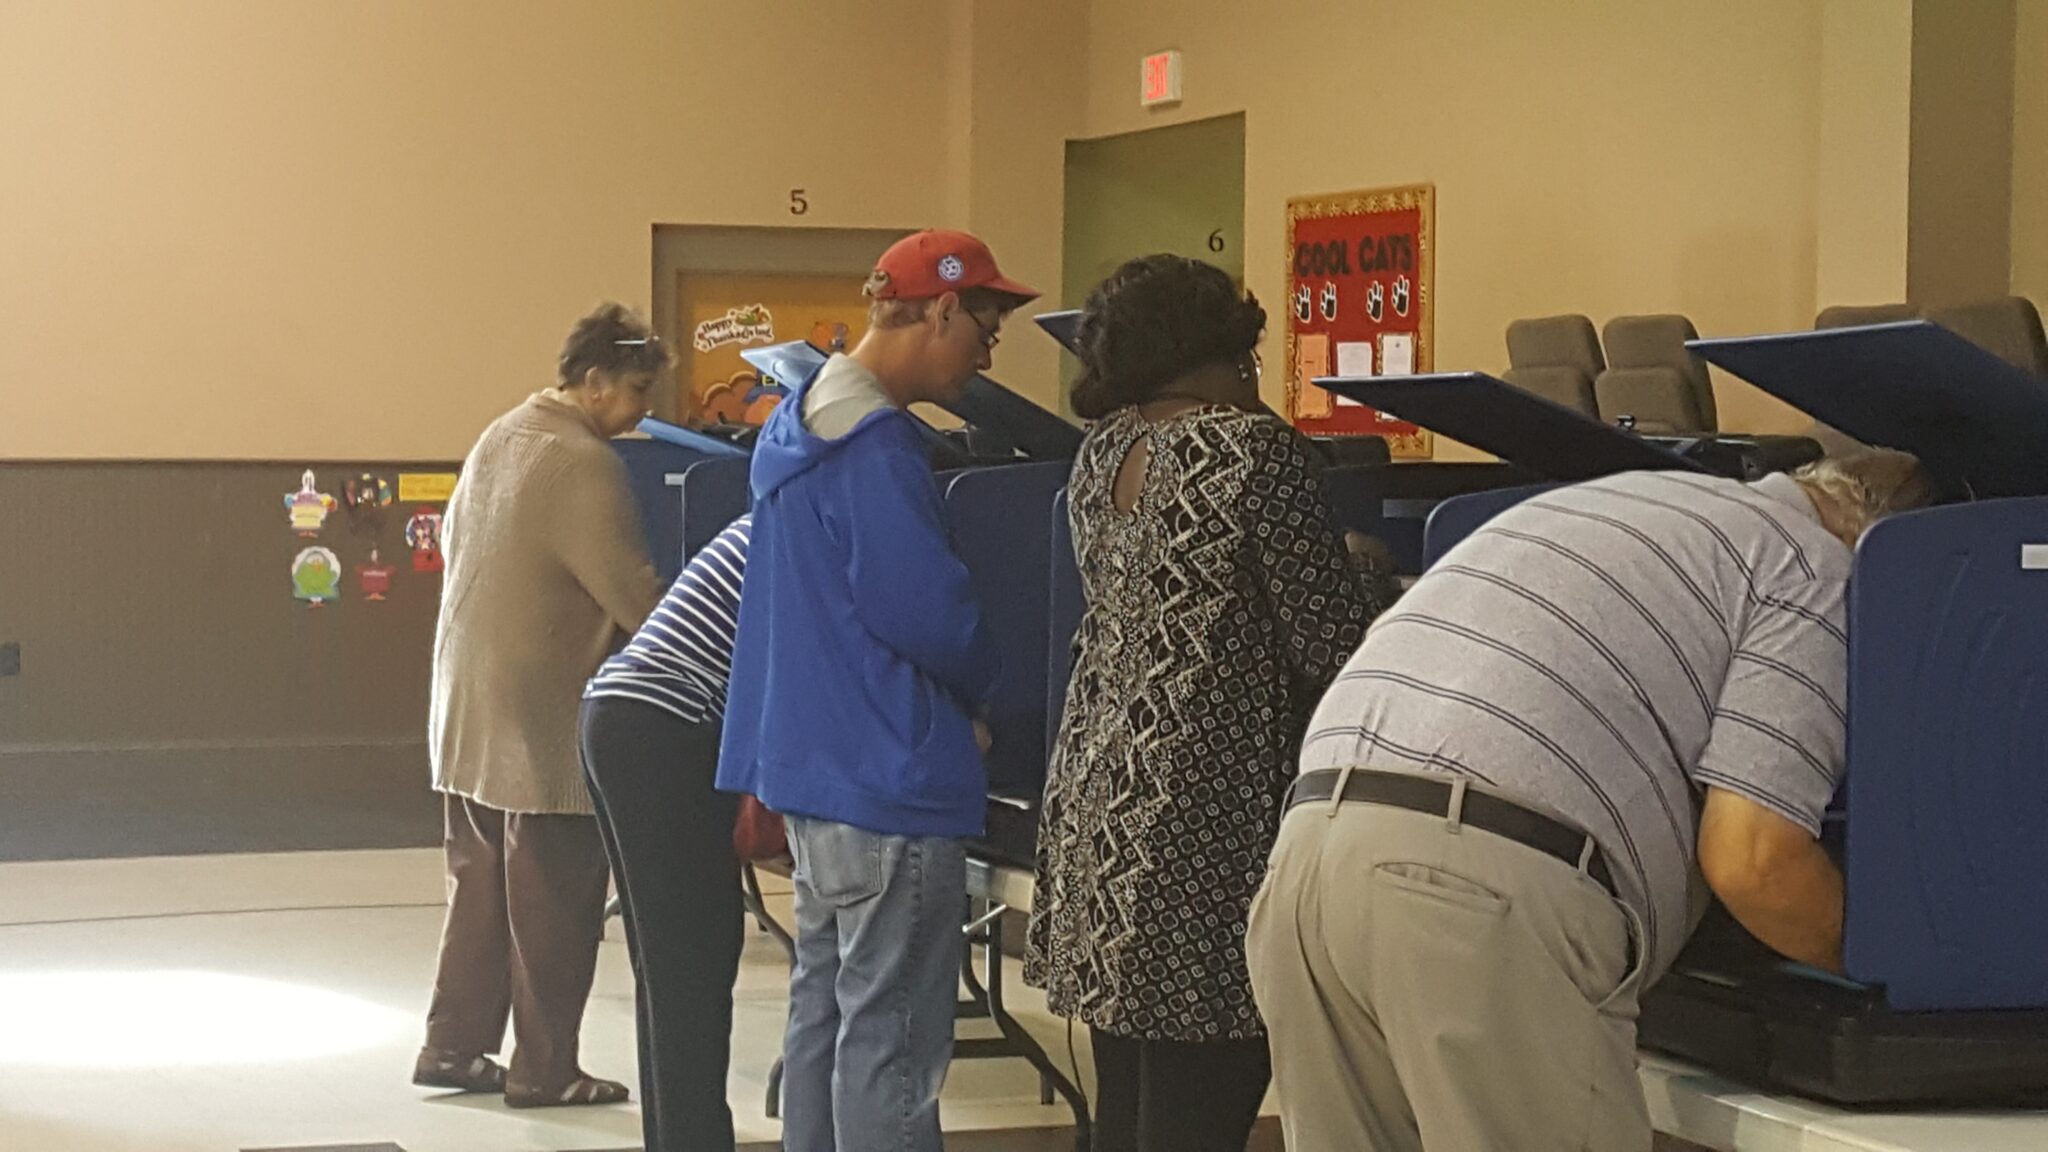 Voters casting their votes at Metro North Church. The wait was around 30 minutes at lunch time. (Via Nikki Gaskins)